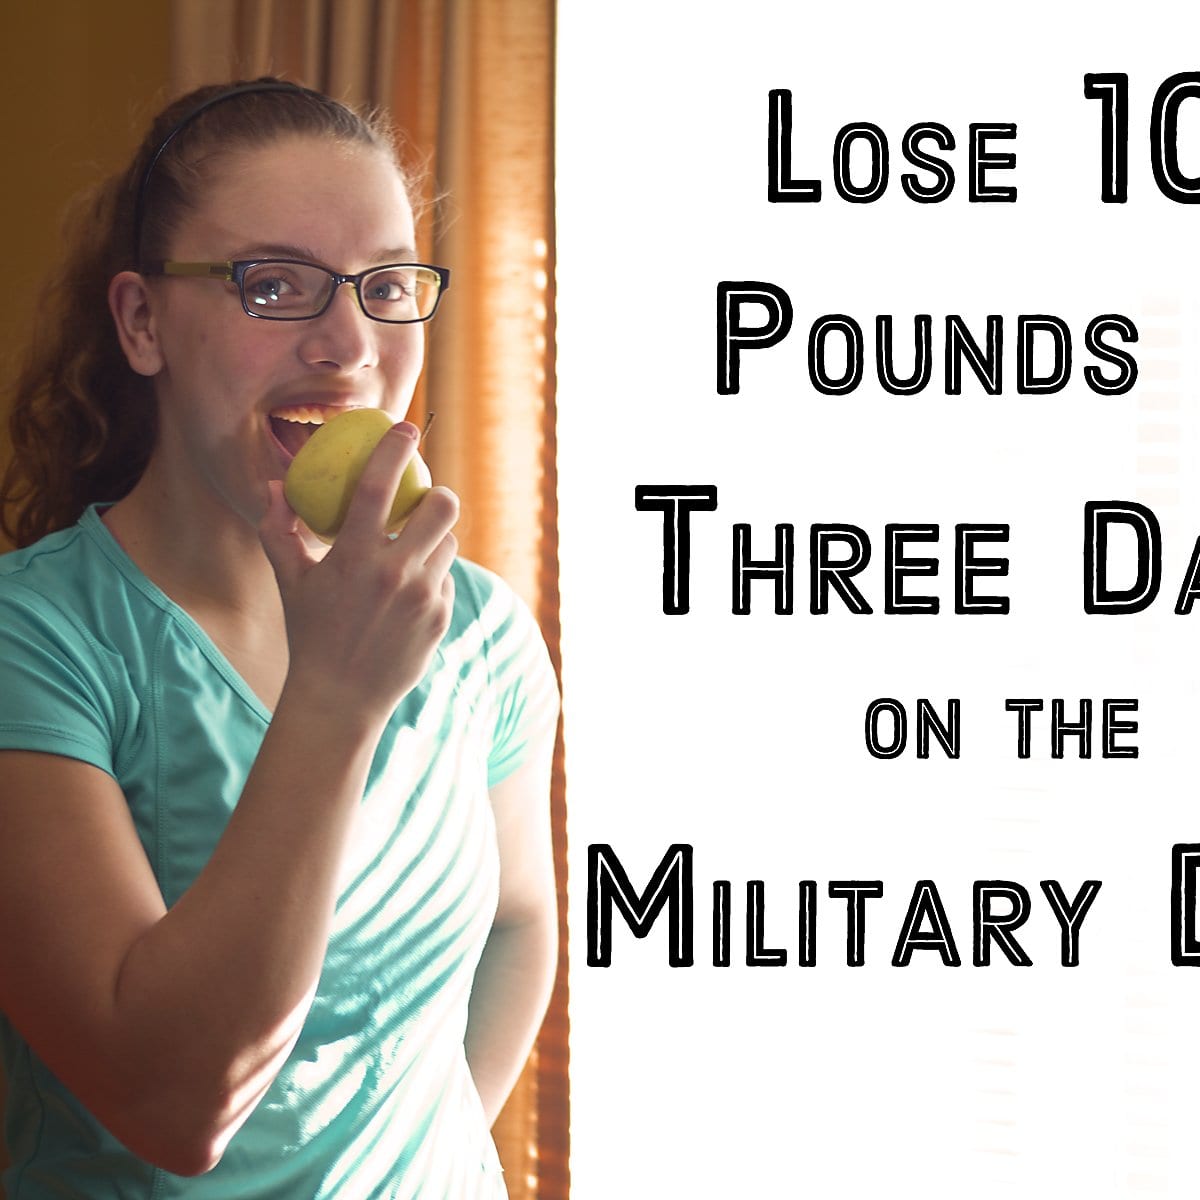 This Banana Diet will Make you Lose 6 Pounds in 3 Days! - Medy Life